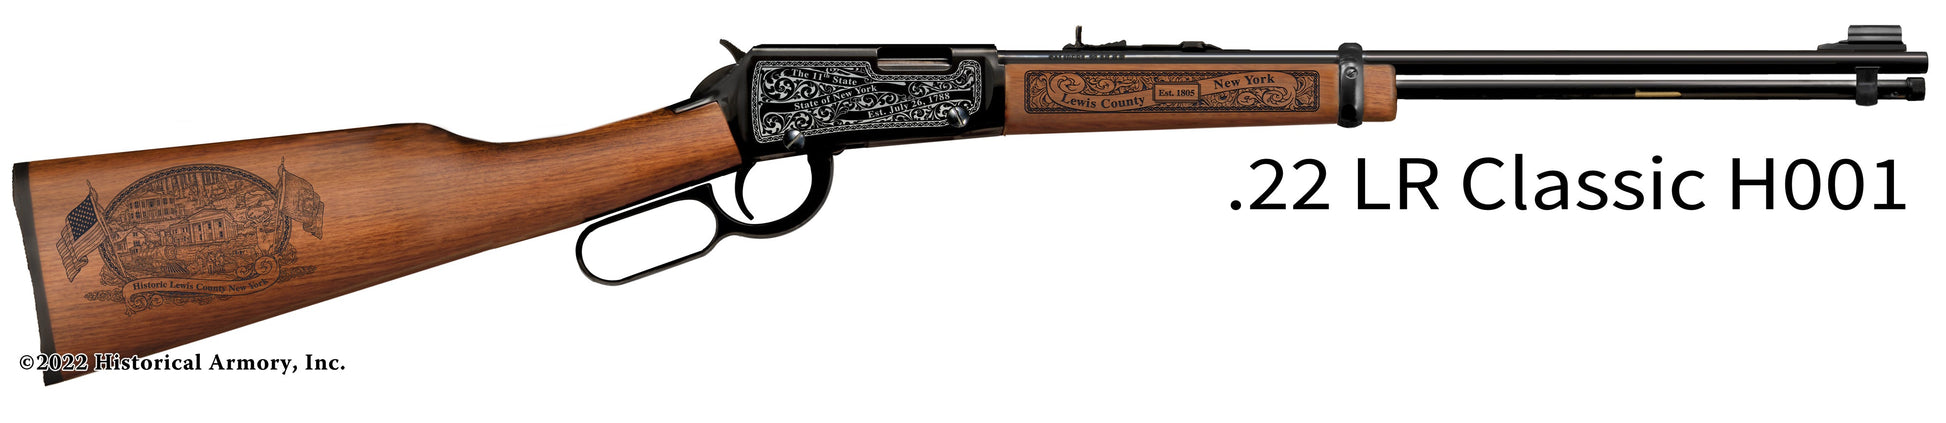 Lewis County New York Engraved Henry H001 Rifle